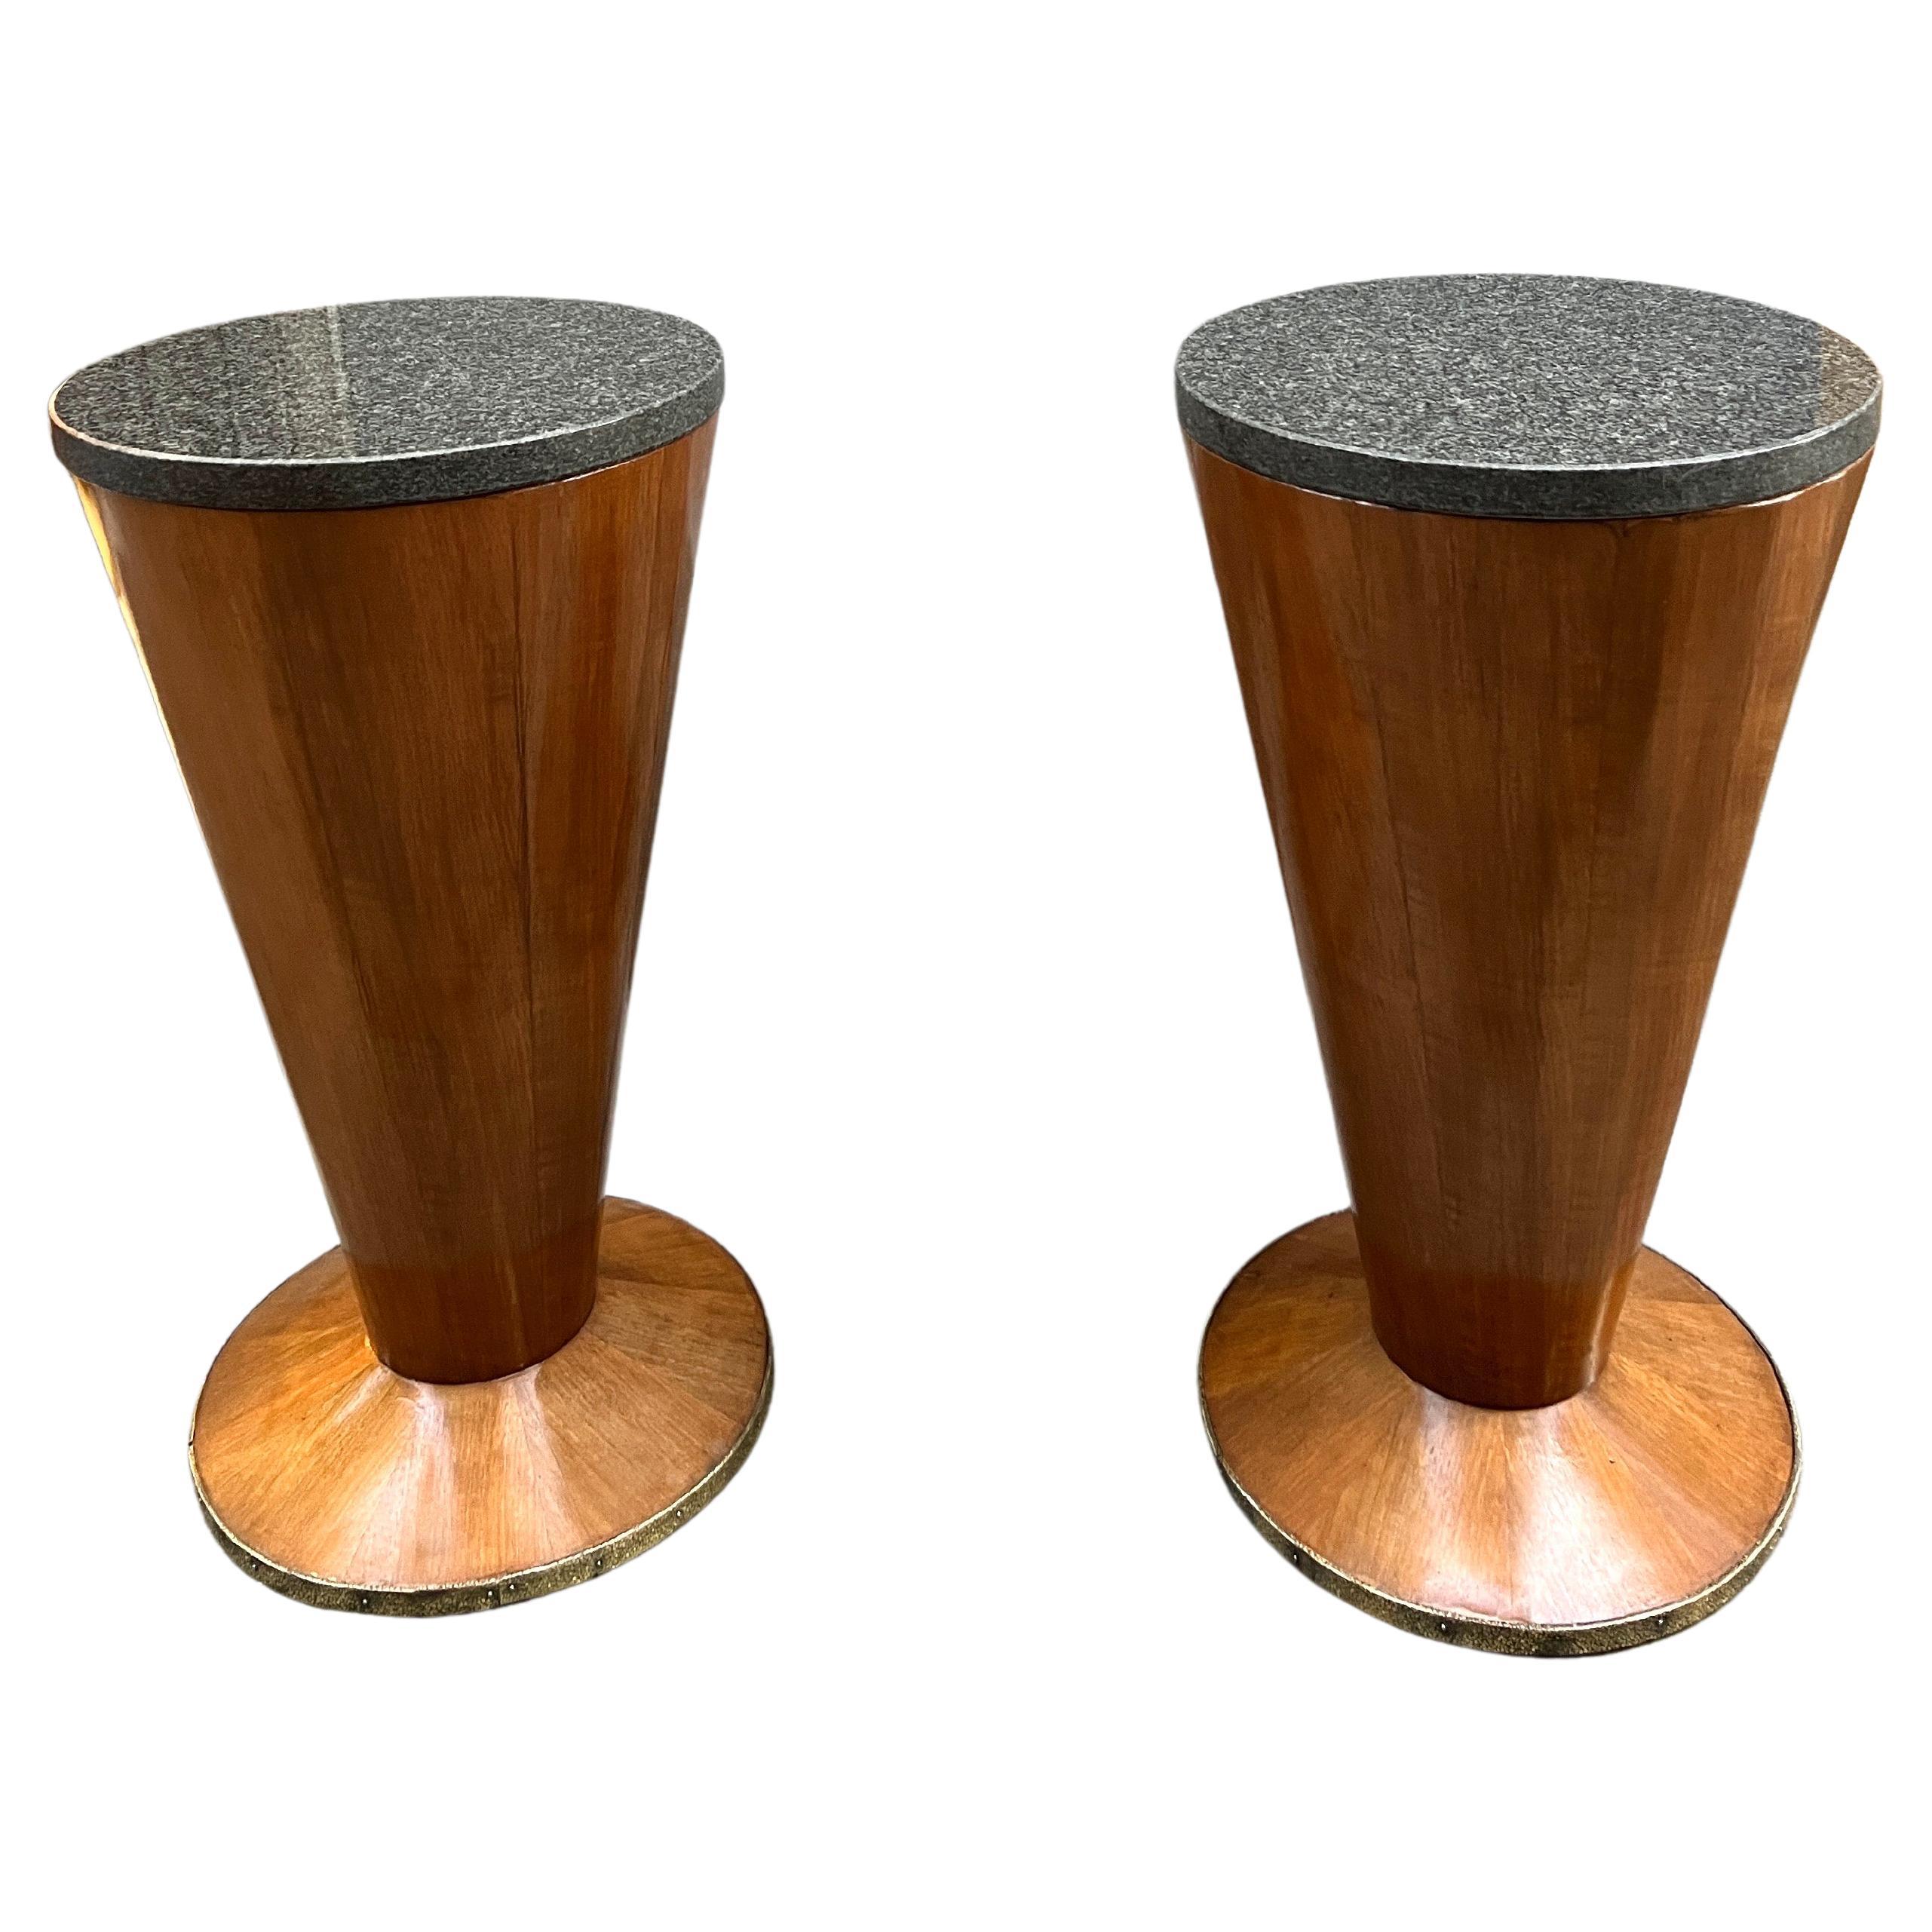 Pair of Art Deco Conical Cherry Wood Side Tables with Marble Top 1940s For Sale